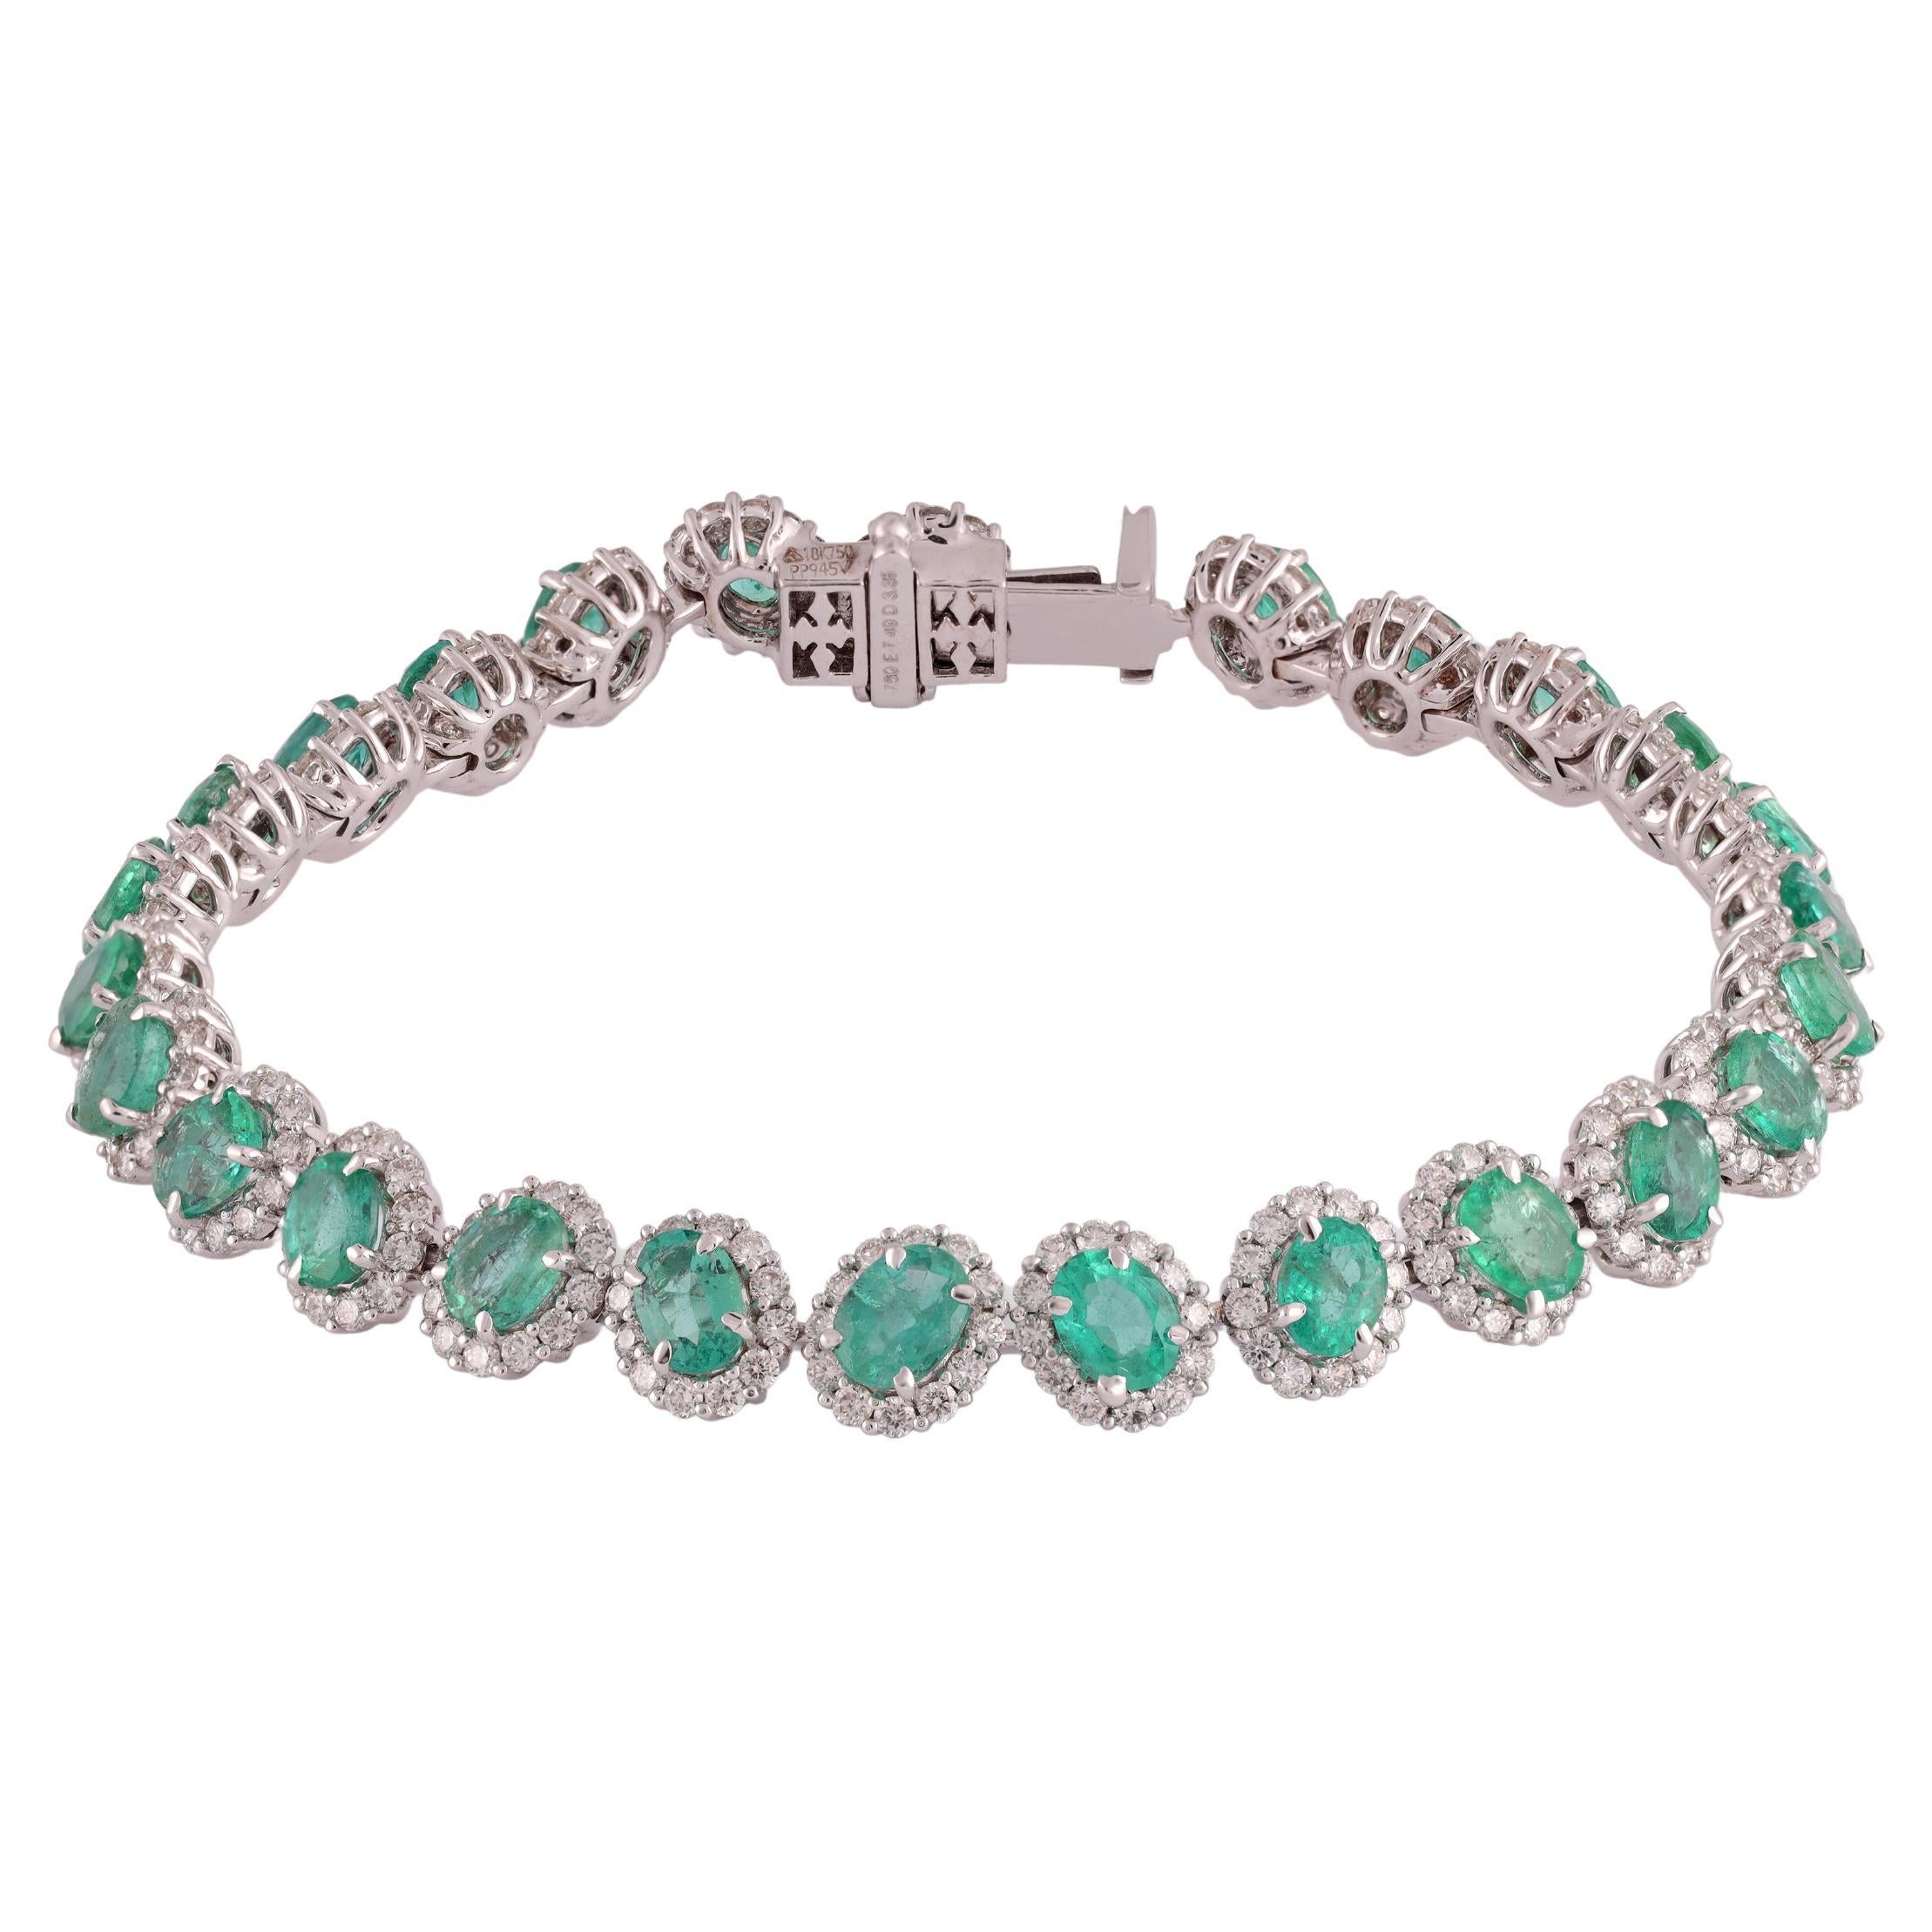 7.49 Carat  Clear Emerald  and Diamond Bracelet in 18k White Gold